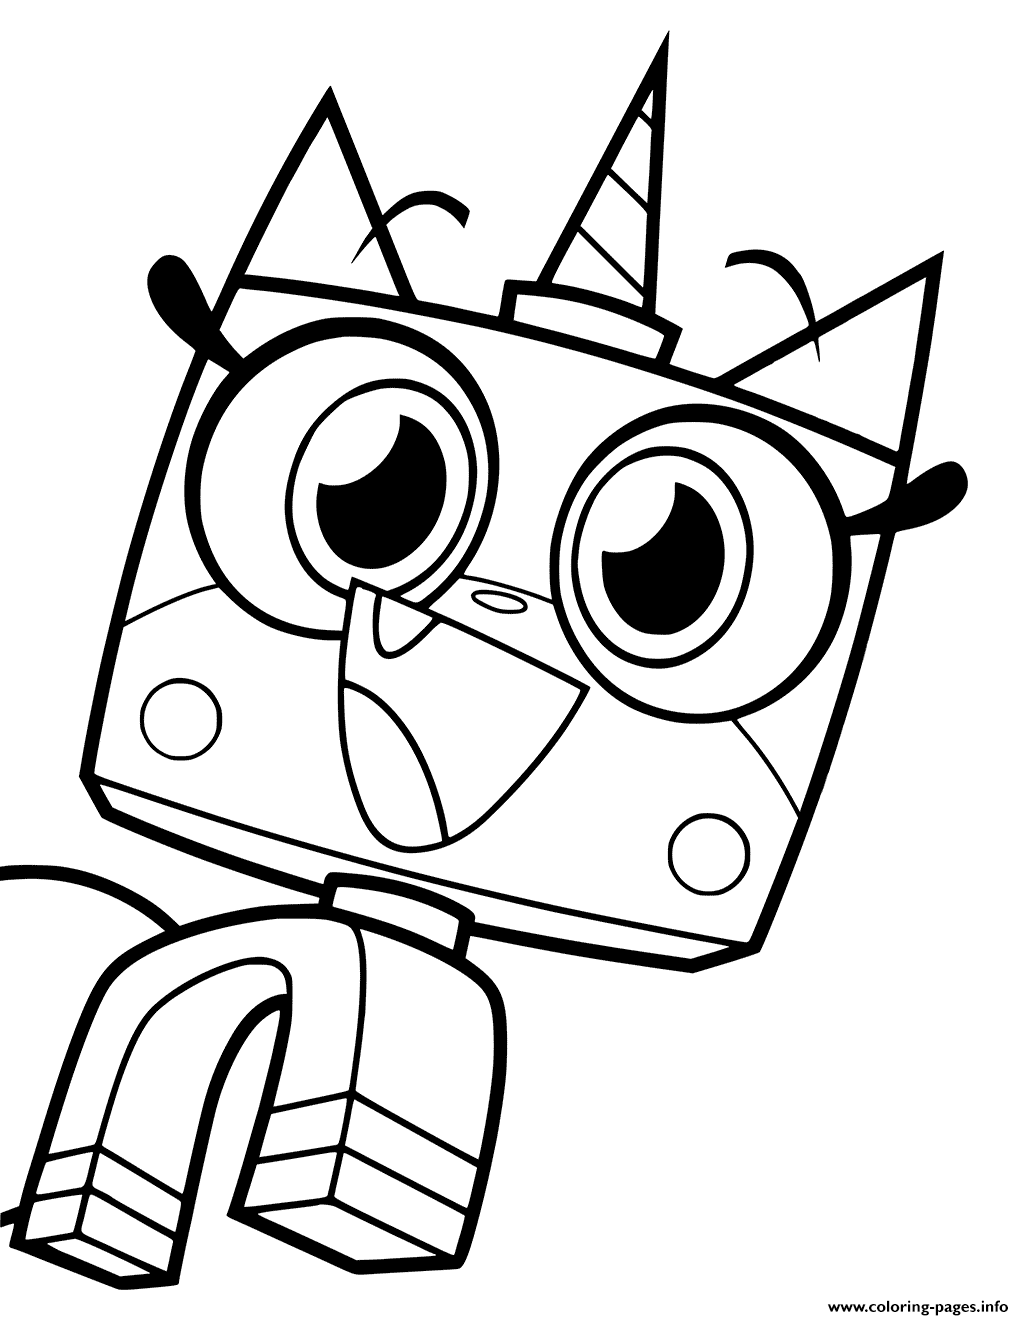 Princess Unikittys coloring pages